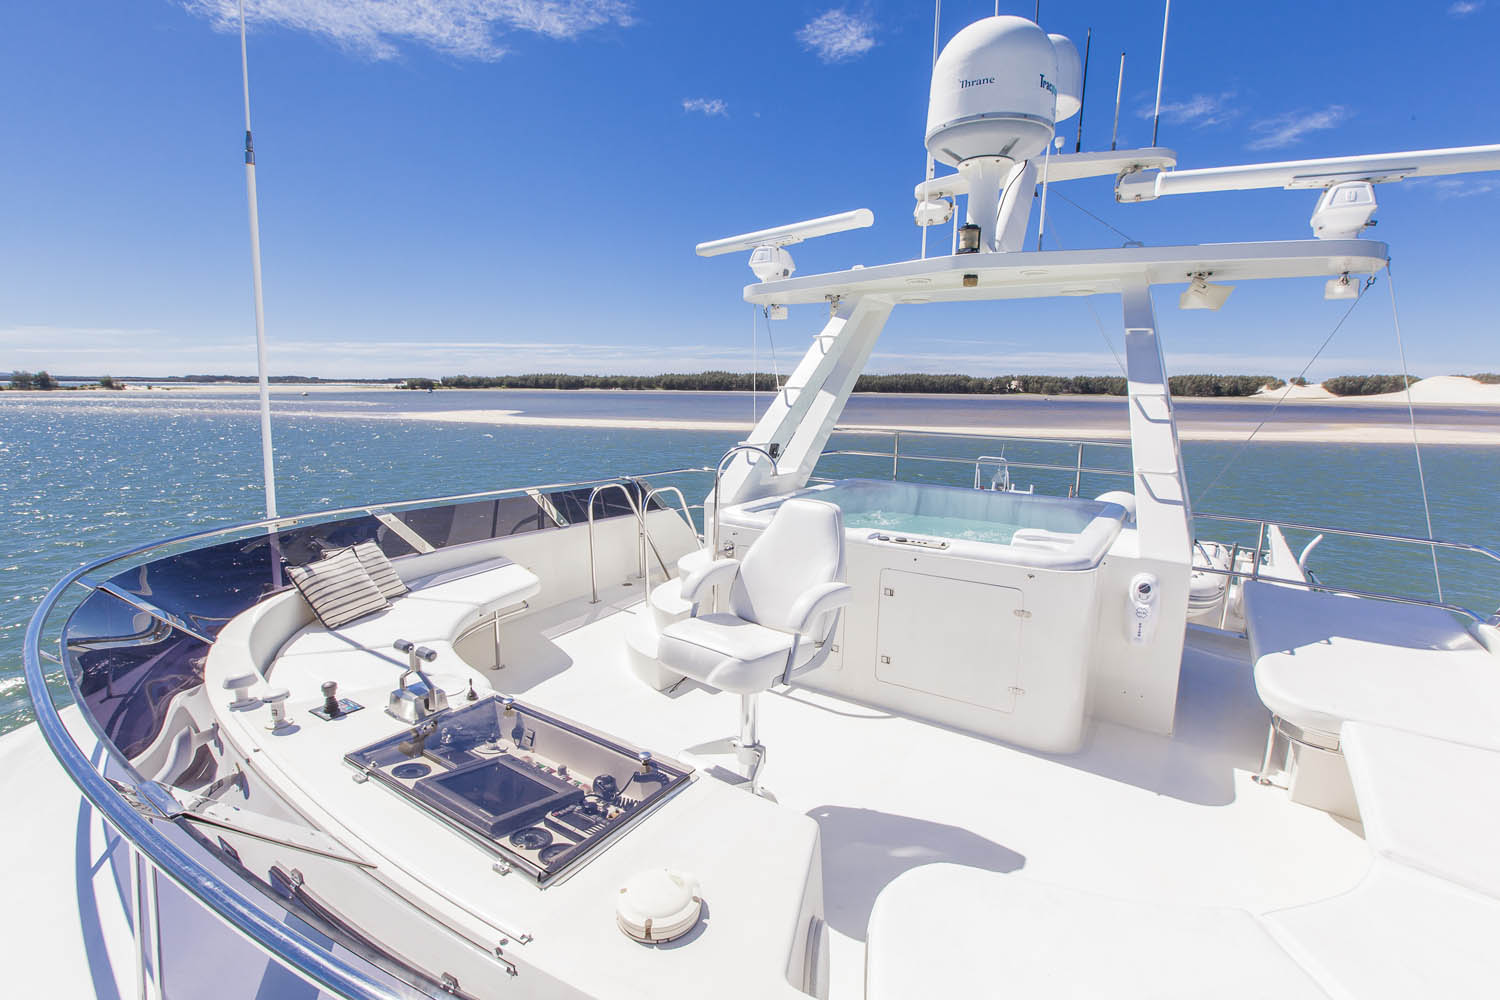 M/Y Silent World II yacht for sale pilot space